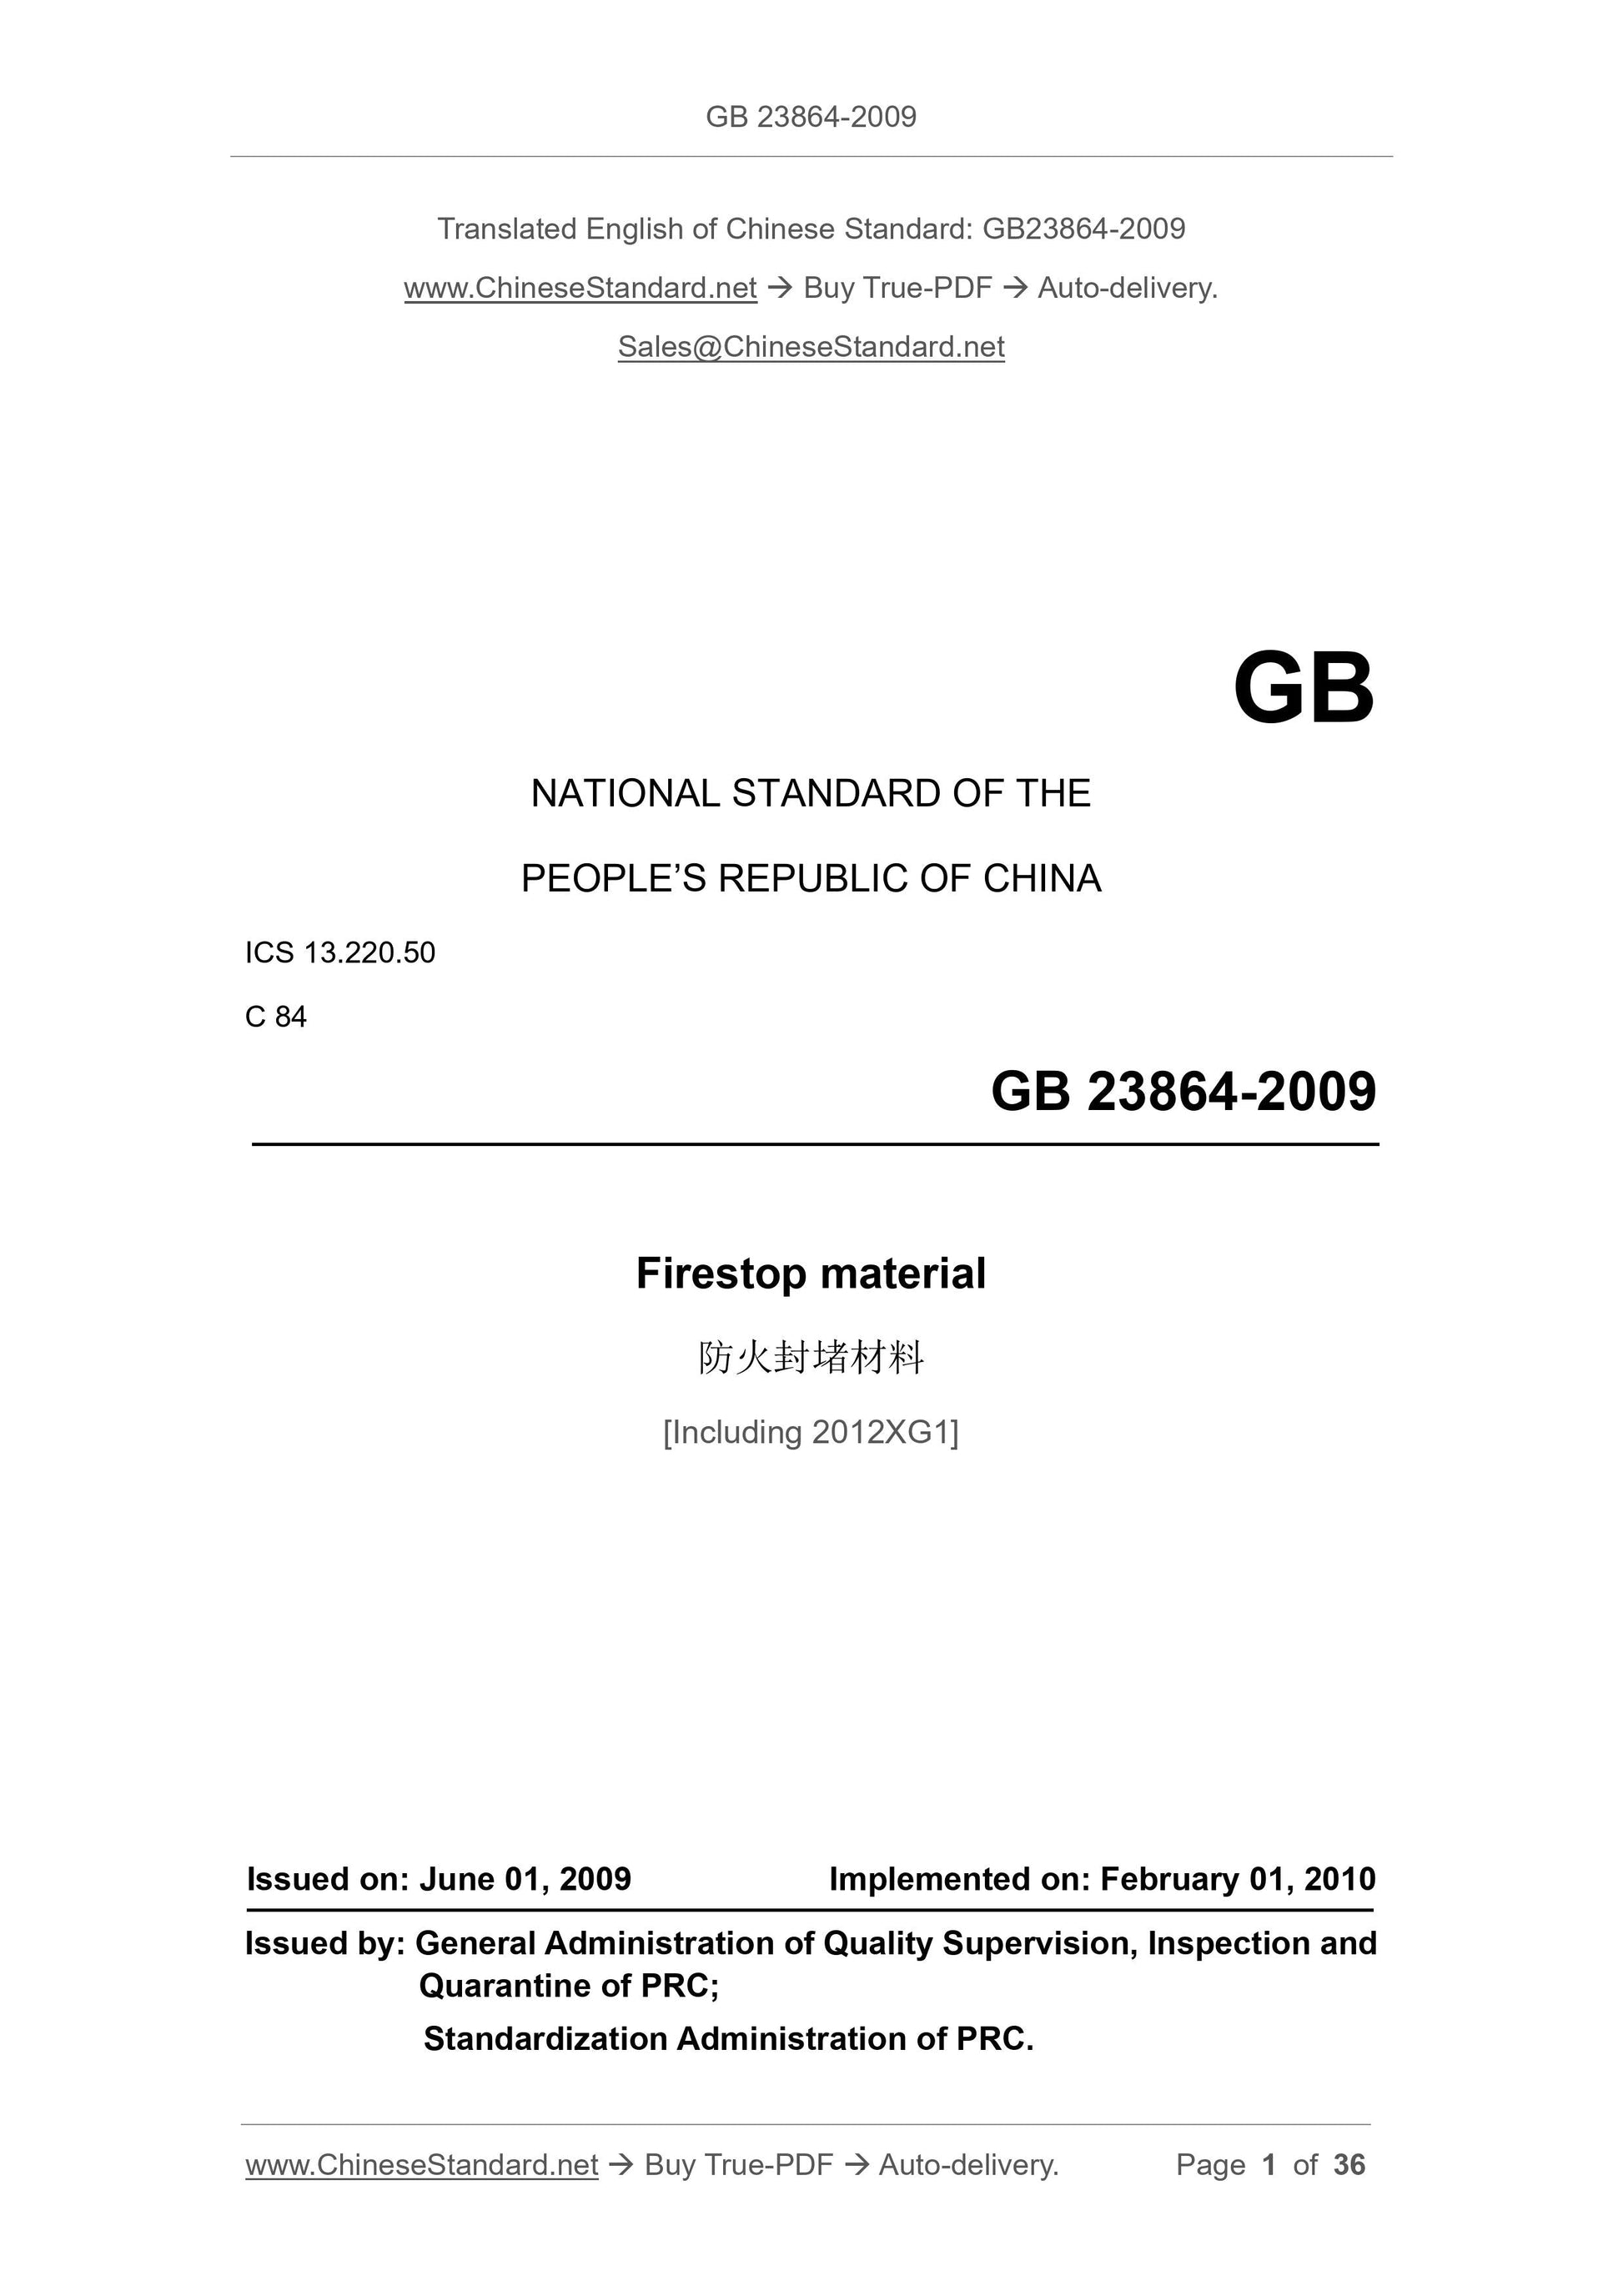 GB 23864-2009 Page 1